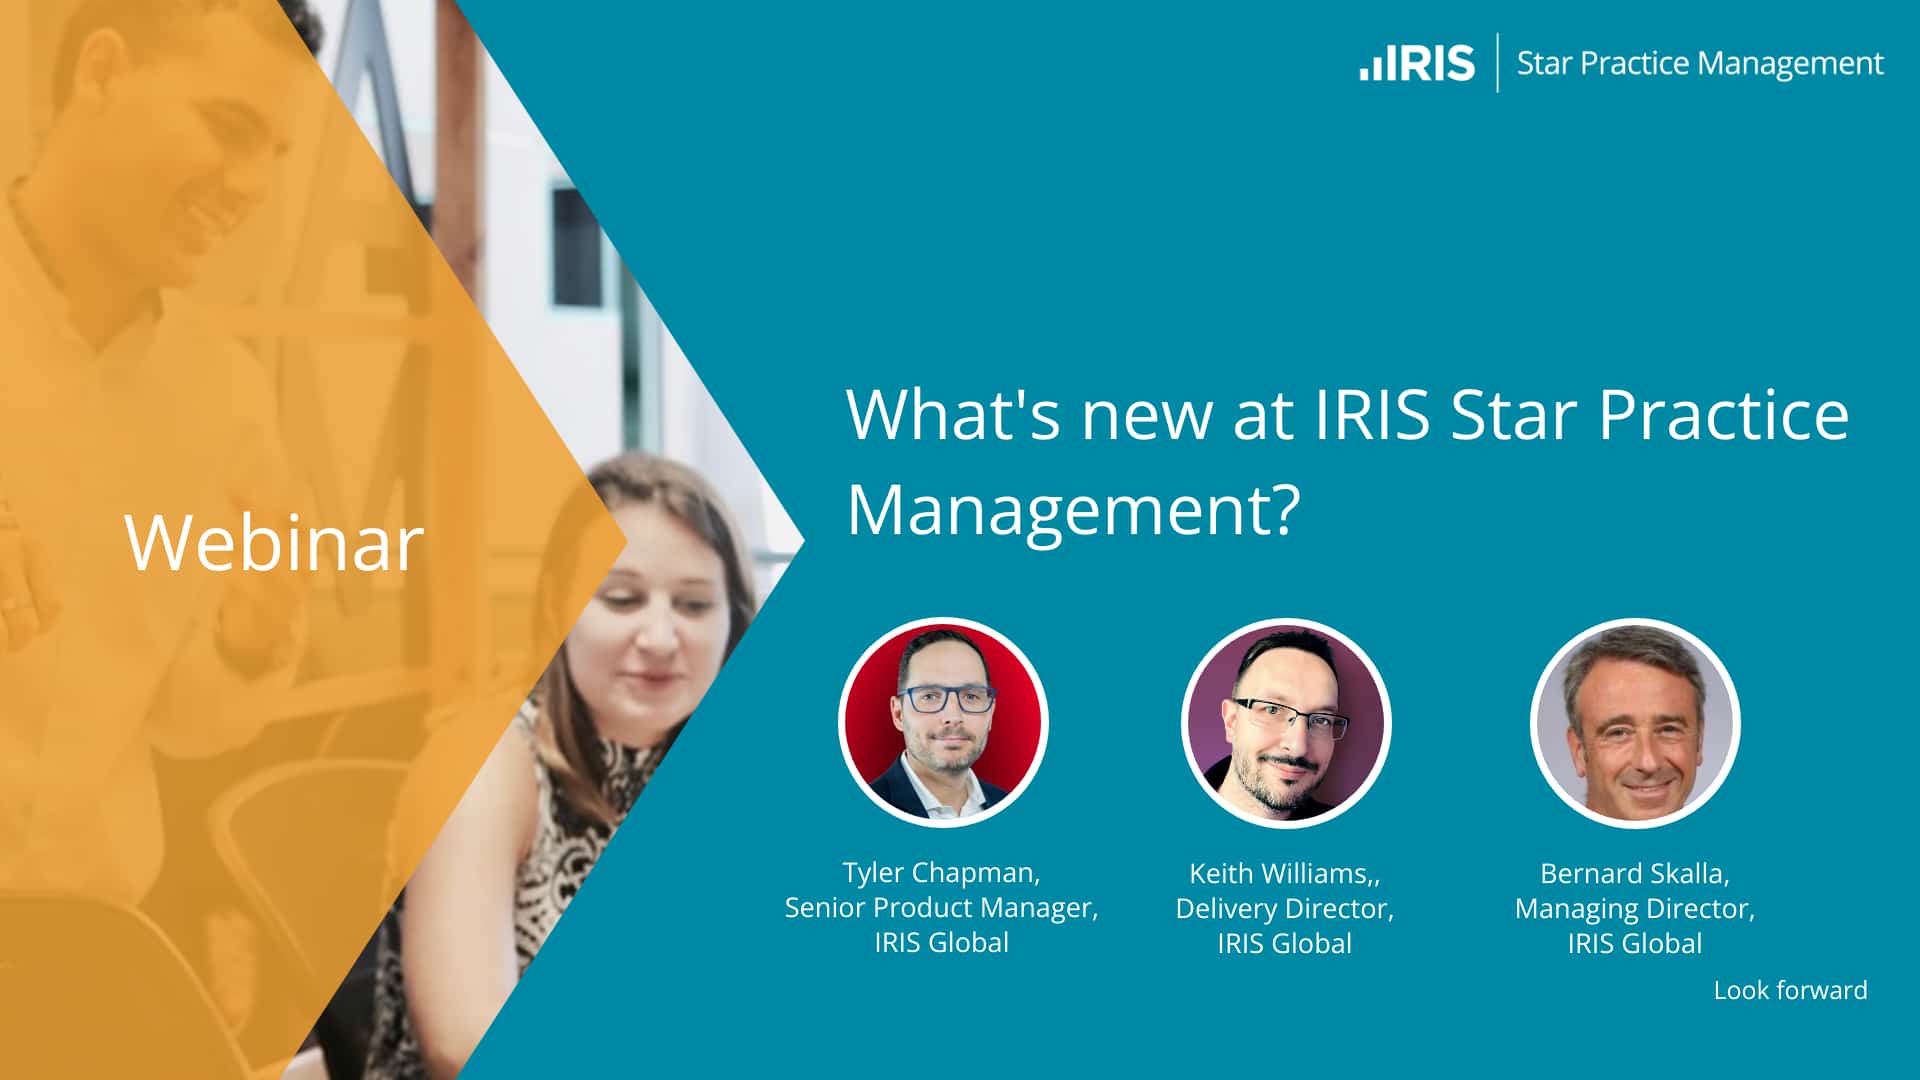 Whats new at IRIS Star Practice Management Holding Screen 31.08.21 Max Quality 1 | What’s new at IRIS Star Practice Management?